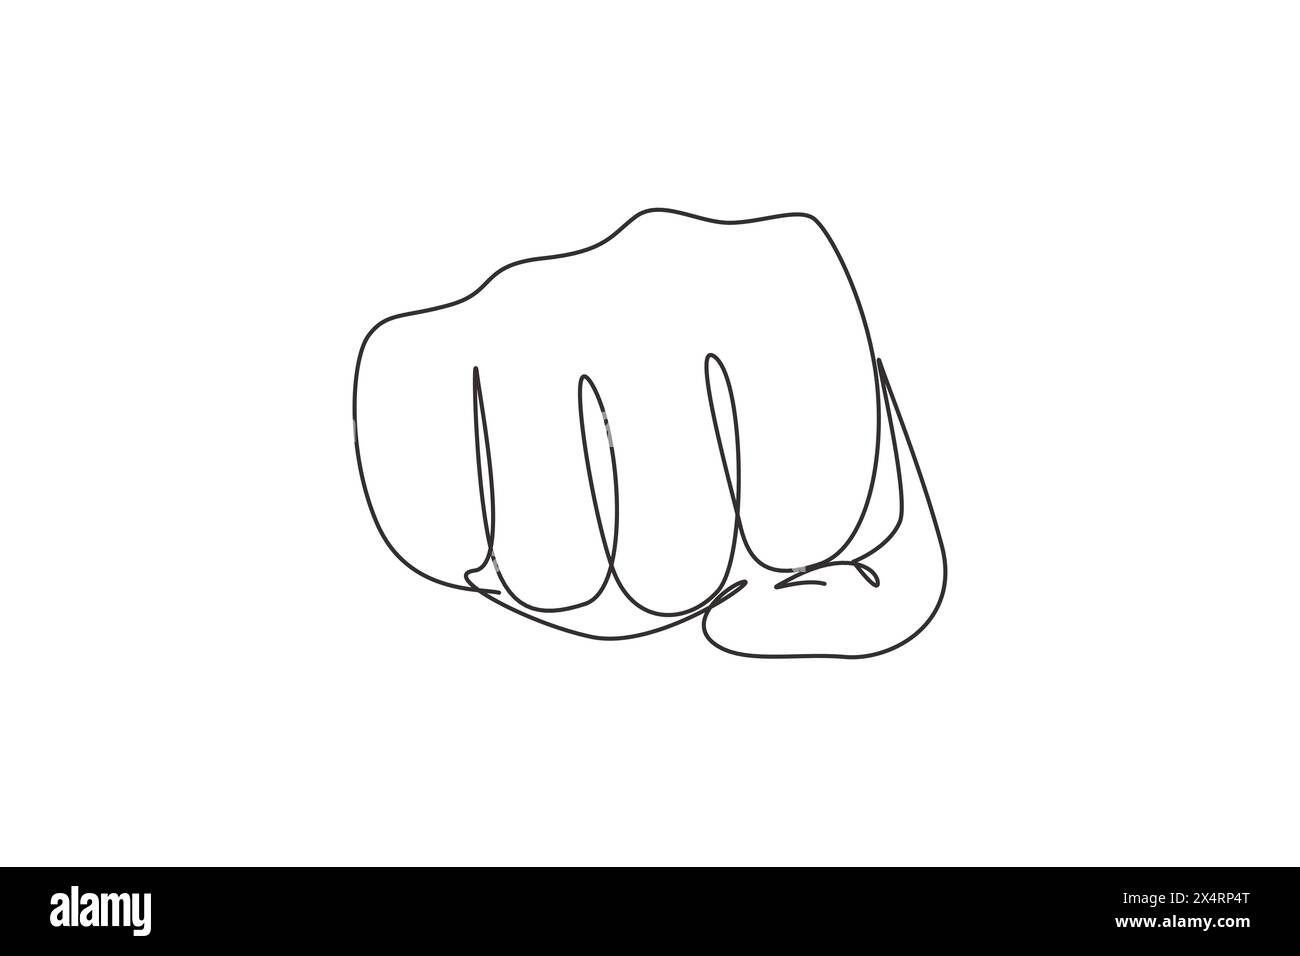 Continuous one line drawing punch fist hand gesture. Sign or symbol of power, hitting, attack, force. Communication with hand gestures. Nonverbal sign Stock Vector